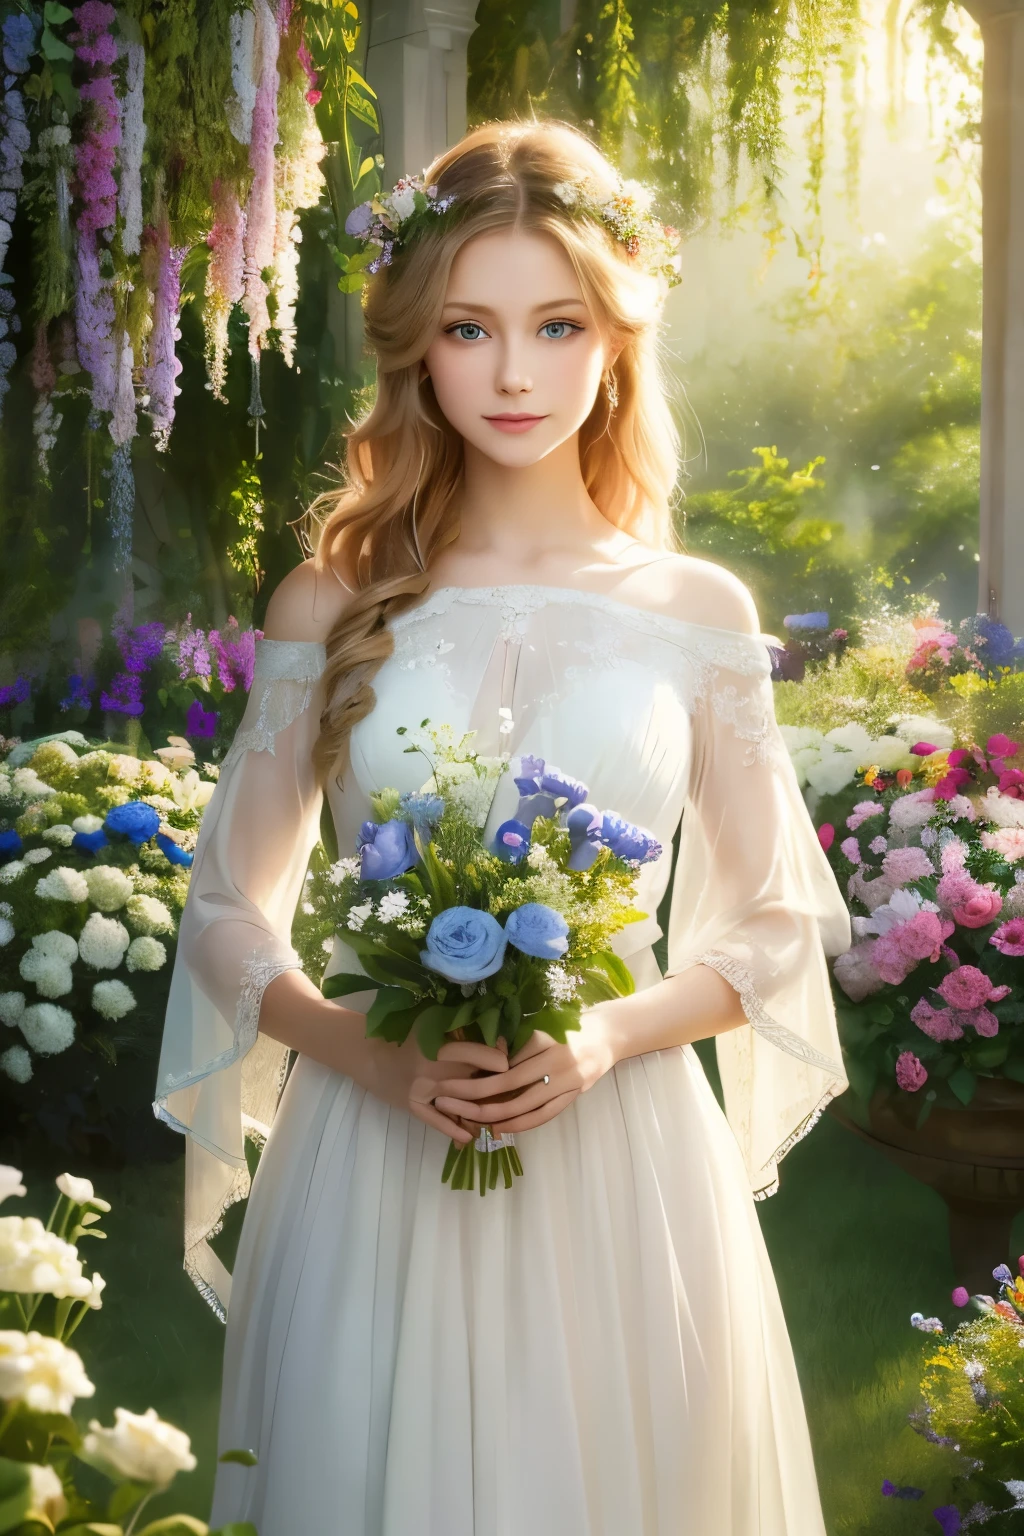 A girl with flowing golden hair and mesmerizing blue eyes, wearing an elegant white dress, standing in the midst of a vibrant garden filled with blooming flowers and lush greenery. The sunlight gently illuminates her delicate features, casting a soft glow on her flawless skin. She holds a delicate butterfly in her hand, while a gentle breeze swirls around her, causing the flowers to dance in harmony. The scene is captured in a breathtaking oil painting, with every detail meticulously crafted to create a masterpiece. The colors are vibrant and vivid, with a hint of ethereal pastel tones, giving the artwork a dreamlike quality. The lighting is soft and diffused, creating a serene and tranquil ambiance. The high-resolution image showcases the artist's impeccable skill, capturing every intricate detail with precision. The overall atmosphere exudes a sense of beauty, grace, and enchantment. The artwork is reminiscent of classical portraits, with a touch of fantasy and whimsy, evoking emotions of wonder and awe